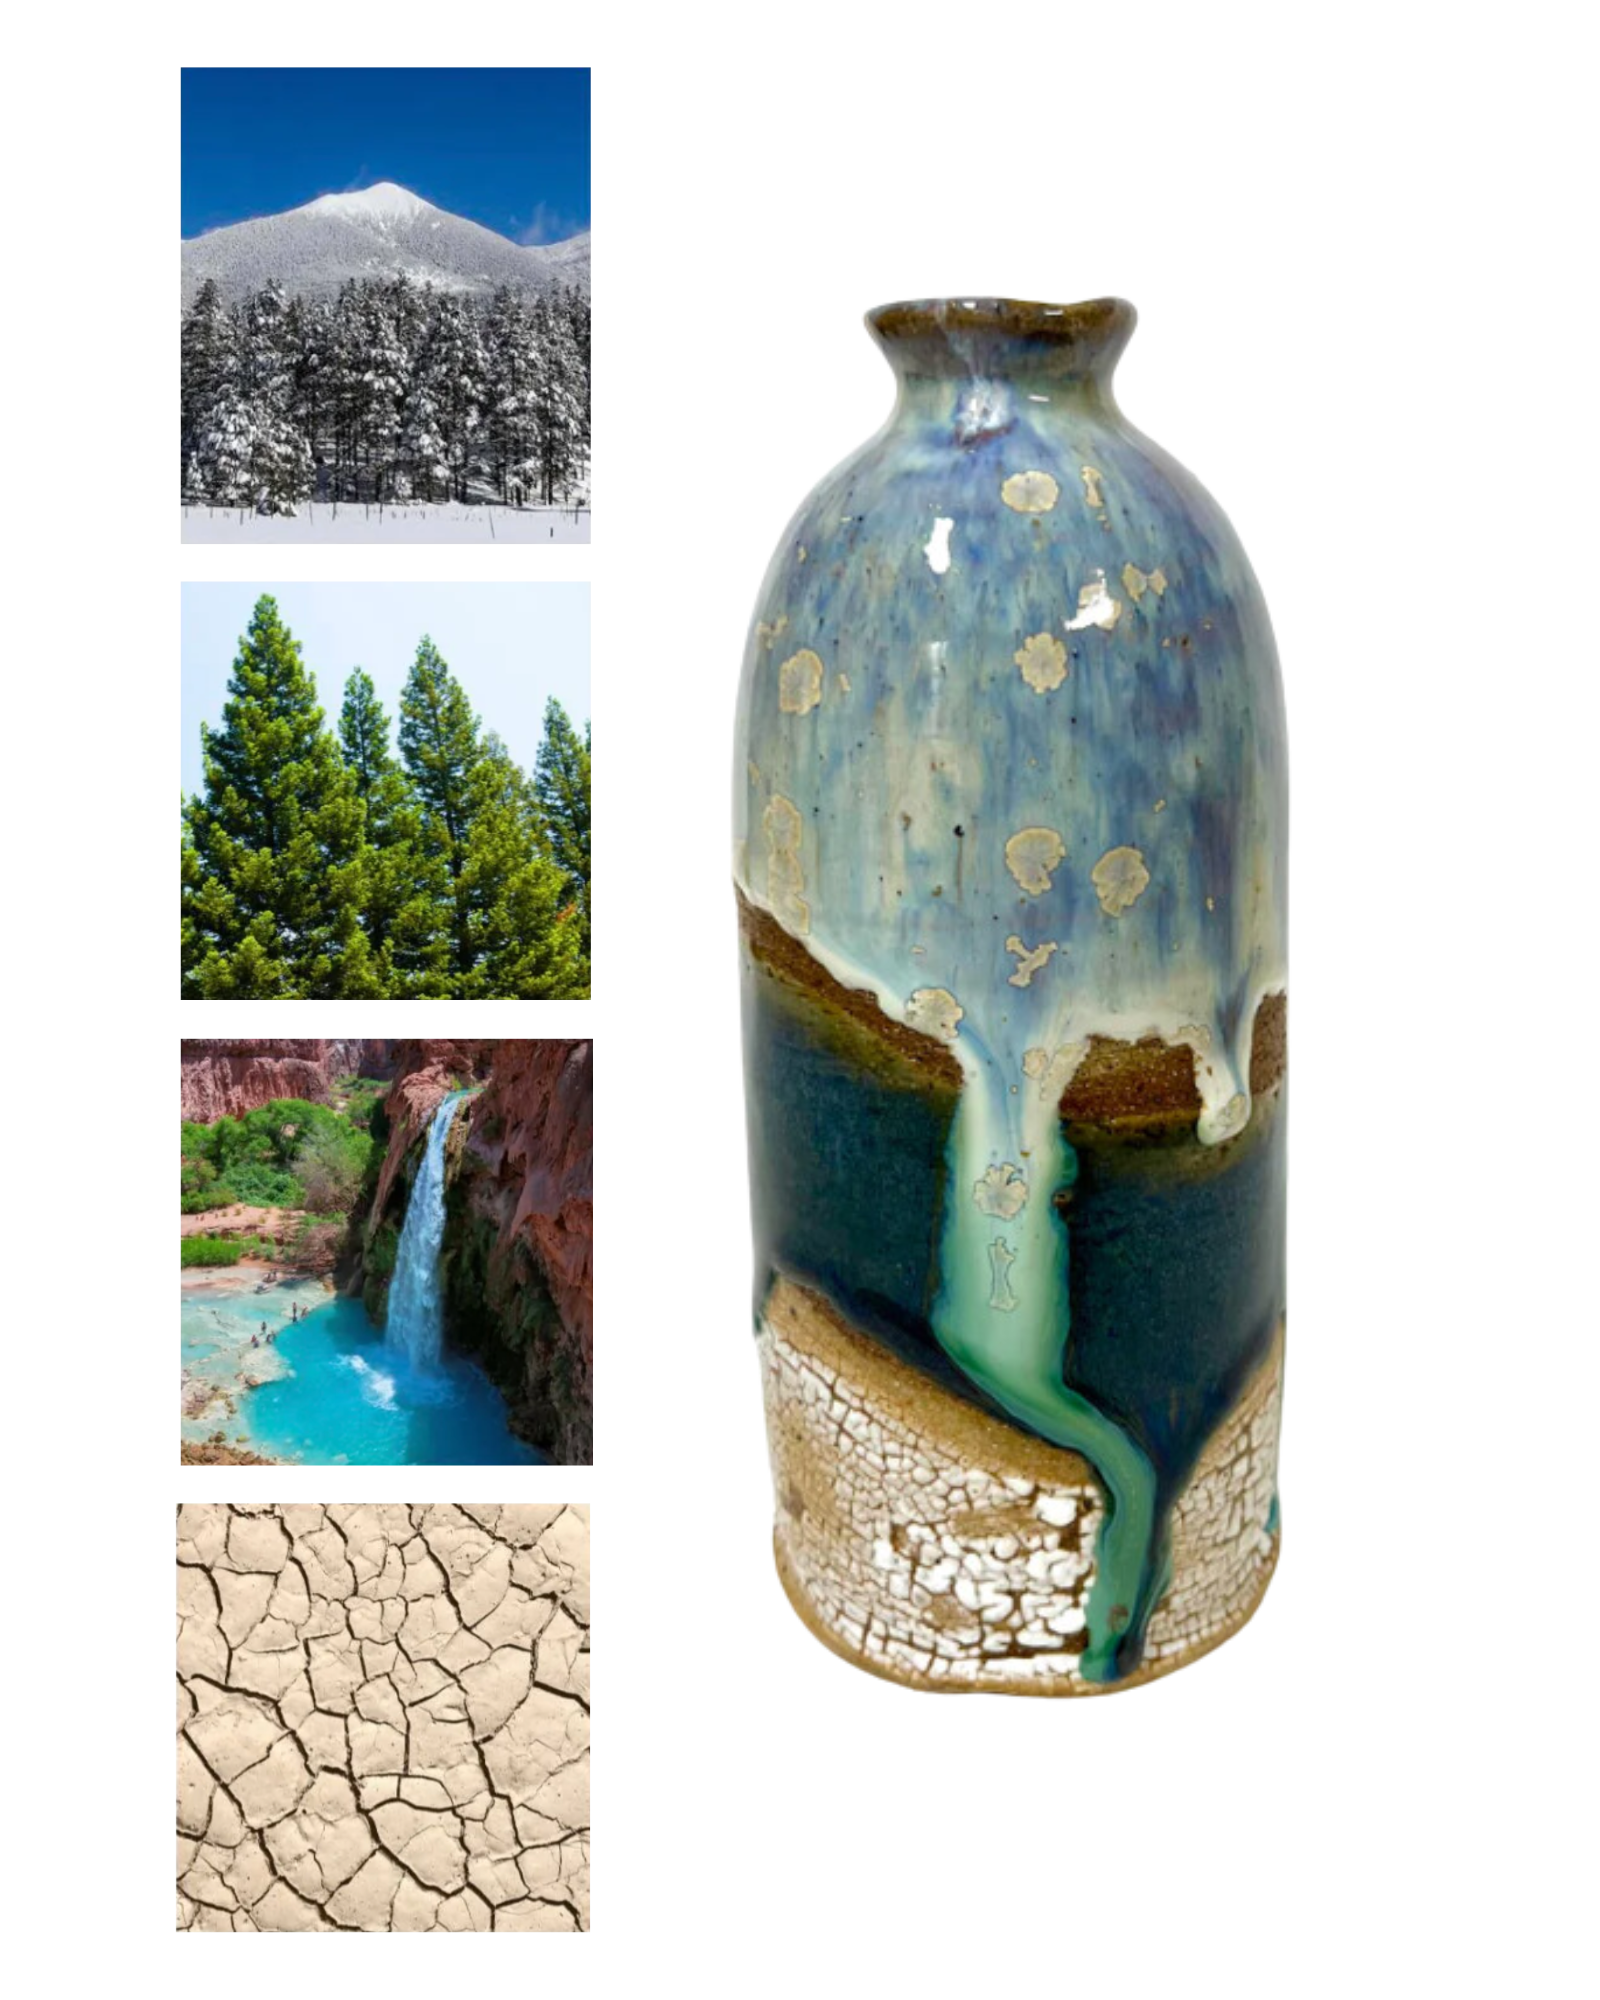 Vase next to photos that inspired design - show covered Flagstaff mountain, pine trees, havasupai falls, and cracked desert earth